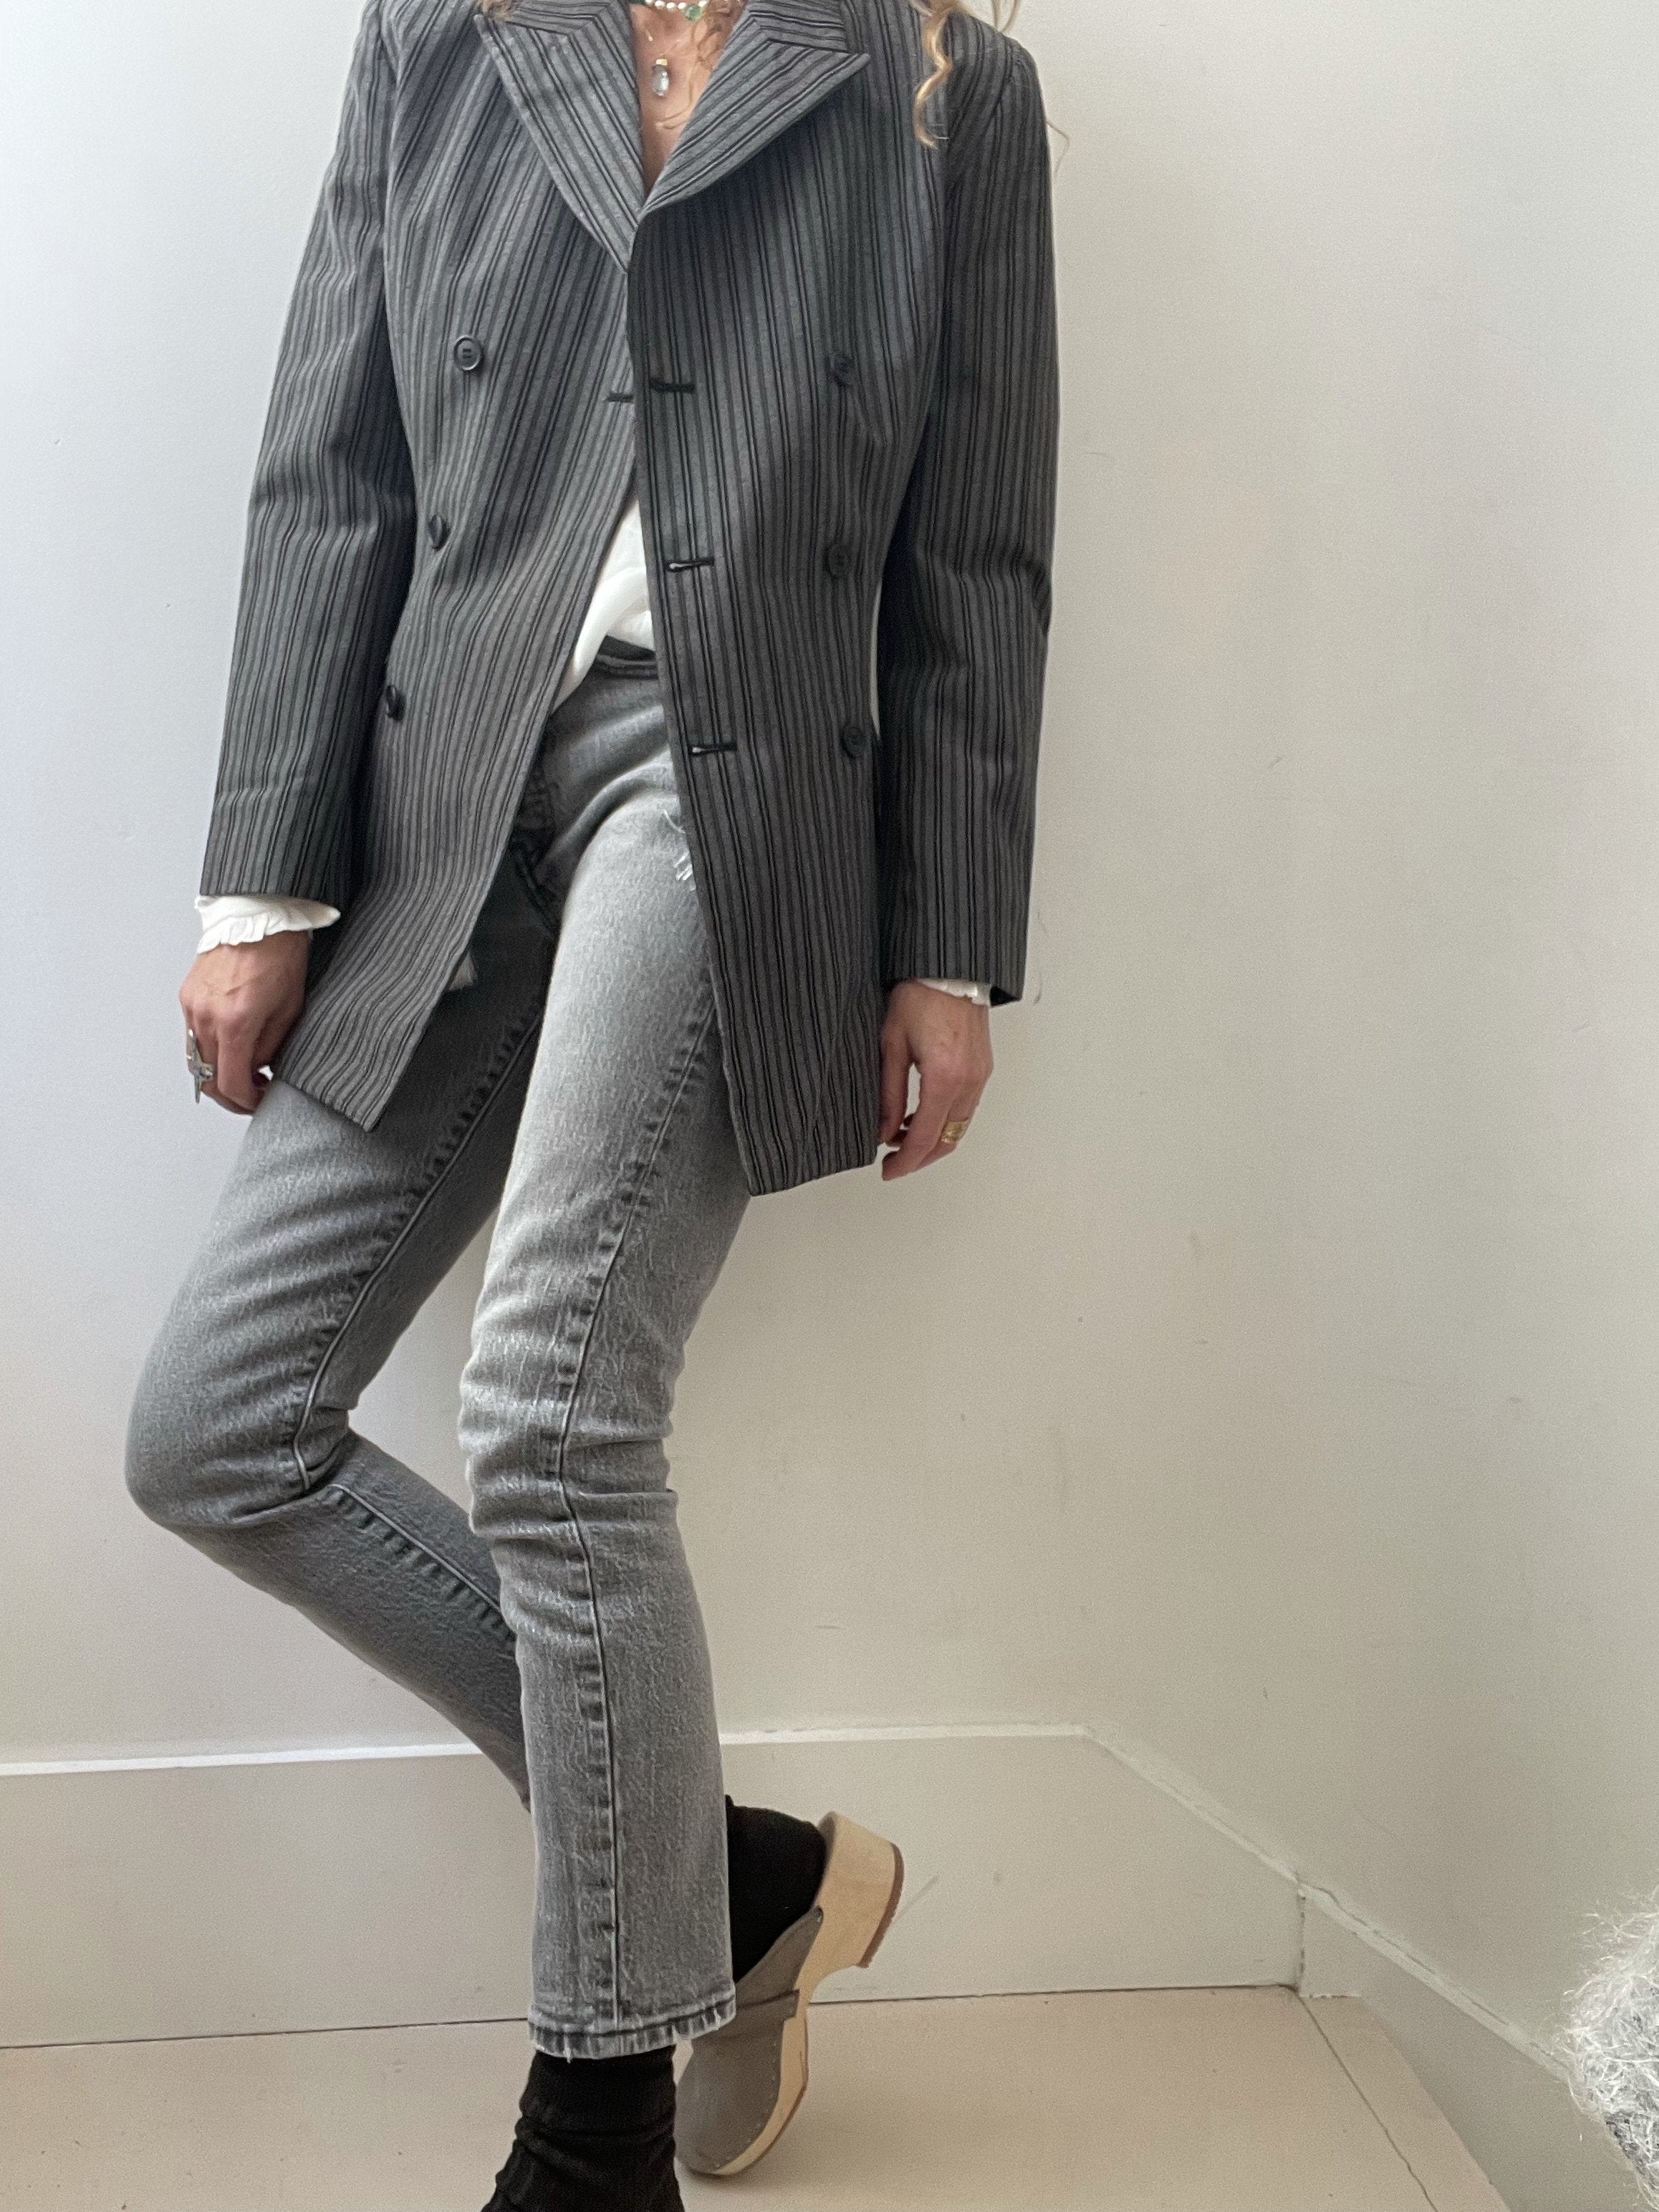 Not specified Jackets Small/Medium Vintage Grey and Black Pinstriped Blazer